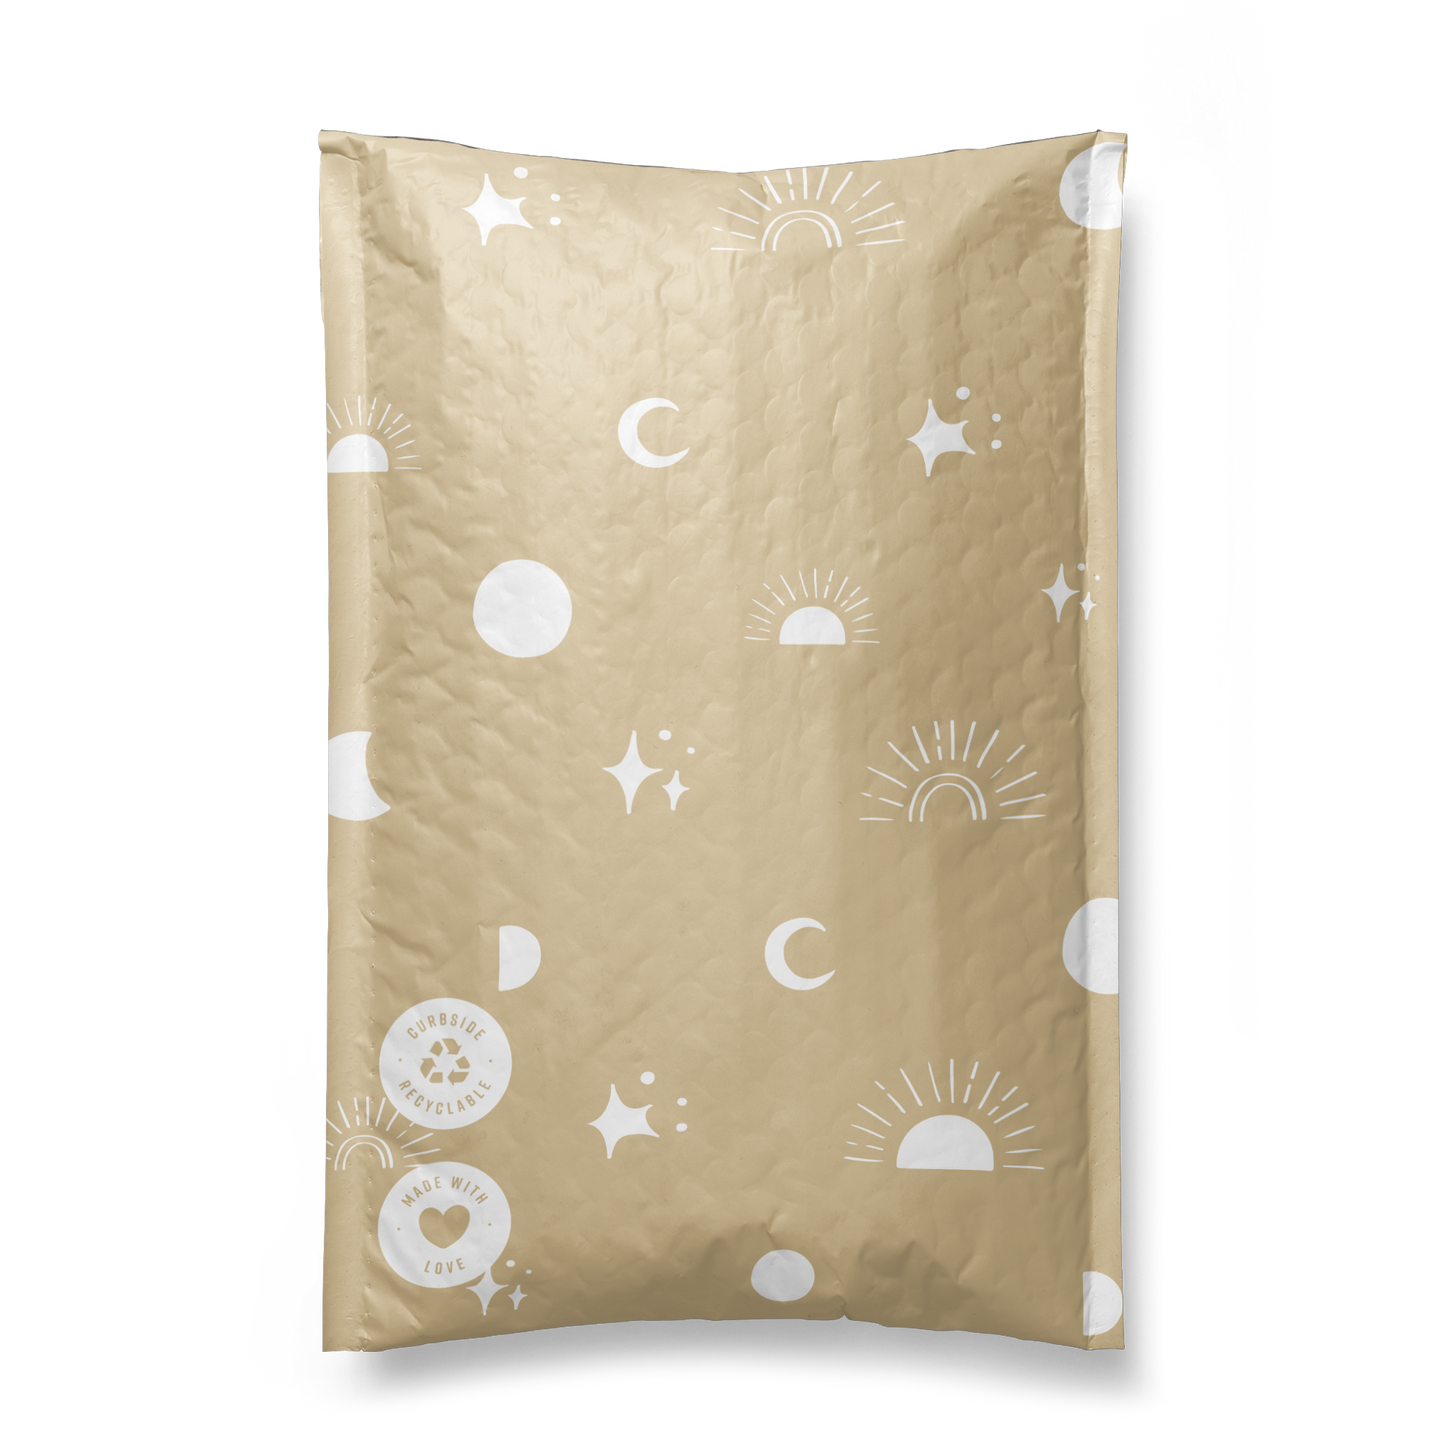 Illustration on impack.co Celestial Padded Paper Mailers 6" x 9" with celestial patterns including stars, moons, and suns, featuring a dripping black ink effect on the top right corner.